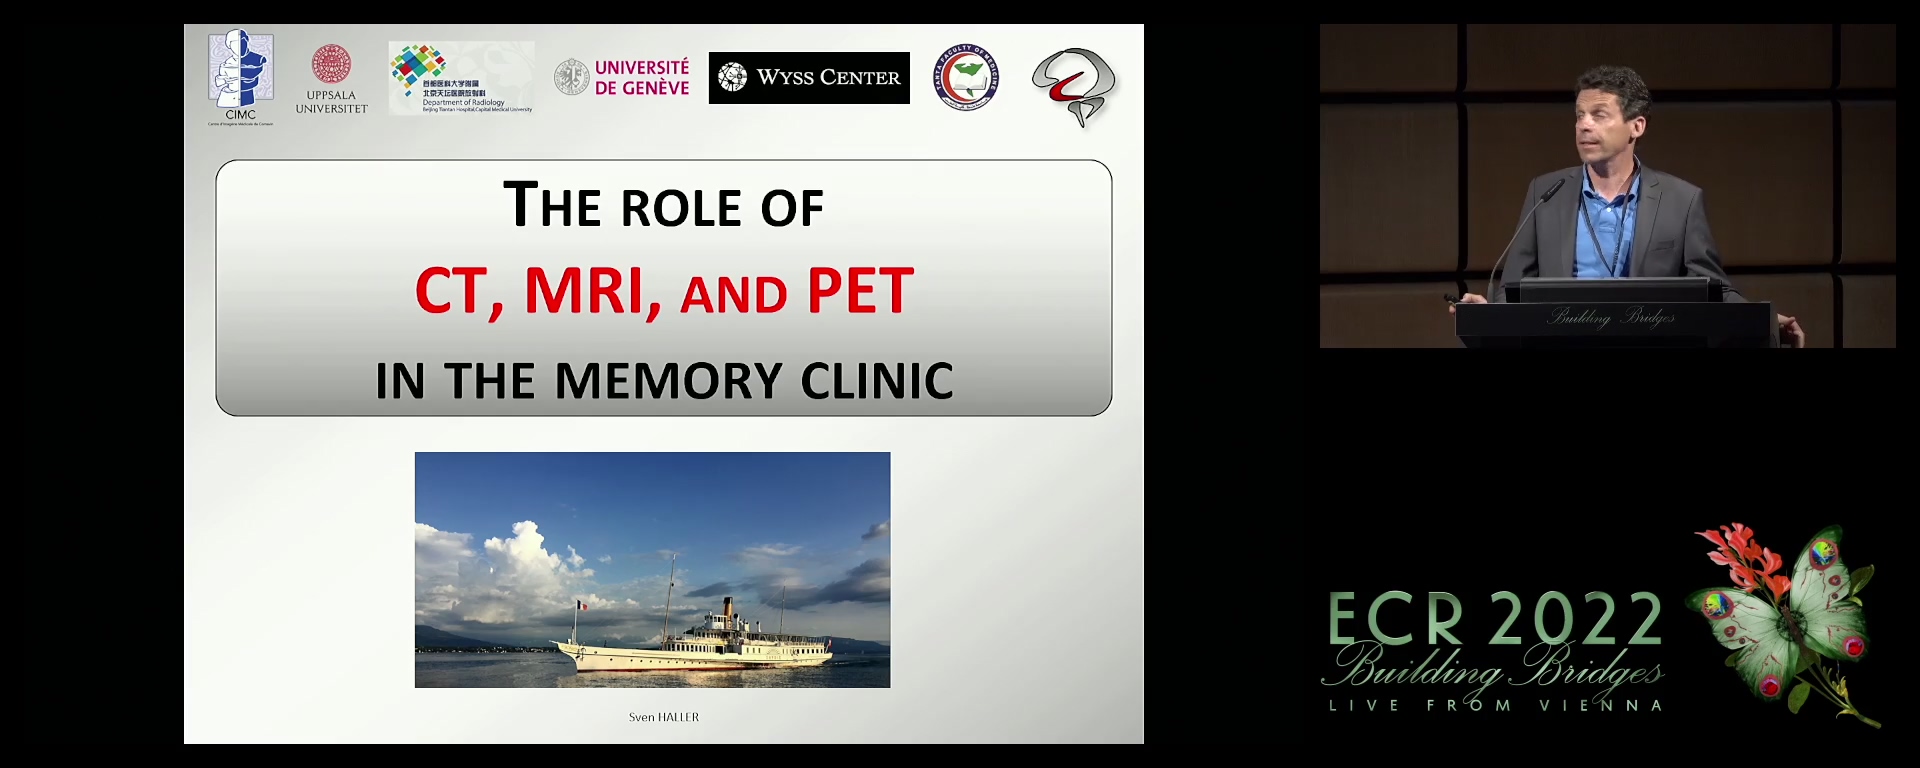 The role of CT, MRI, and PET in the memory clinic